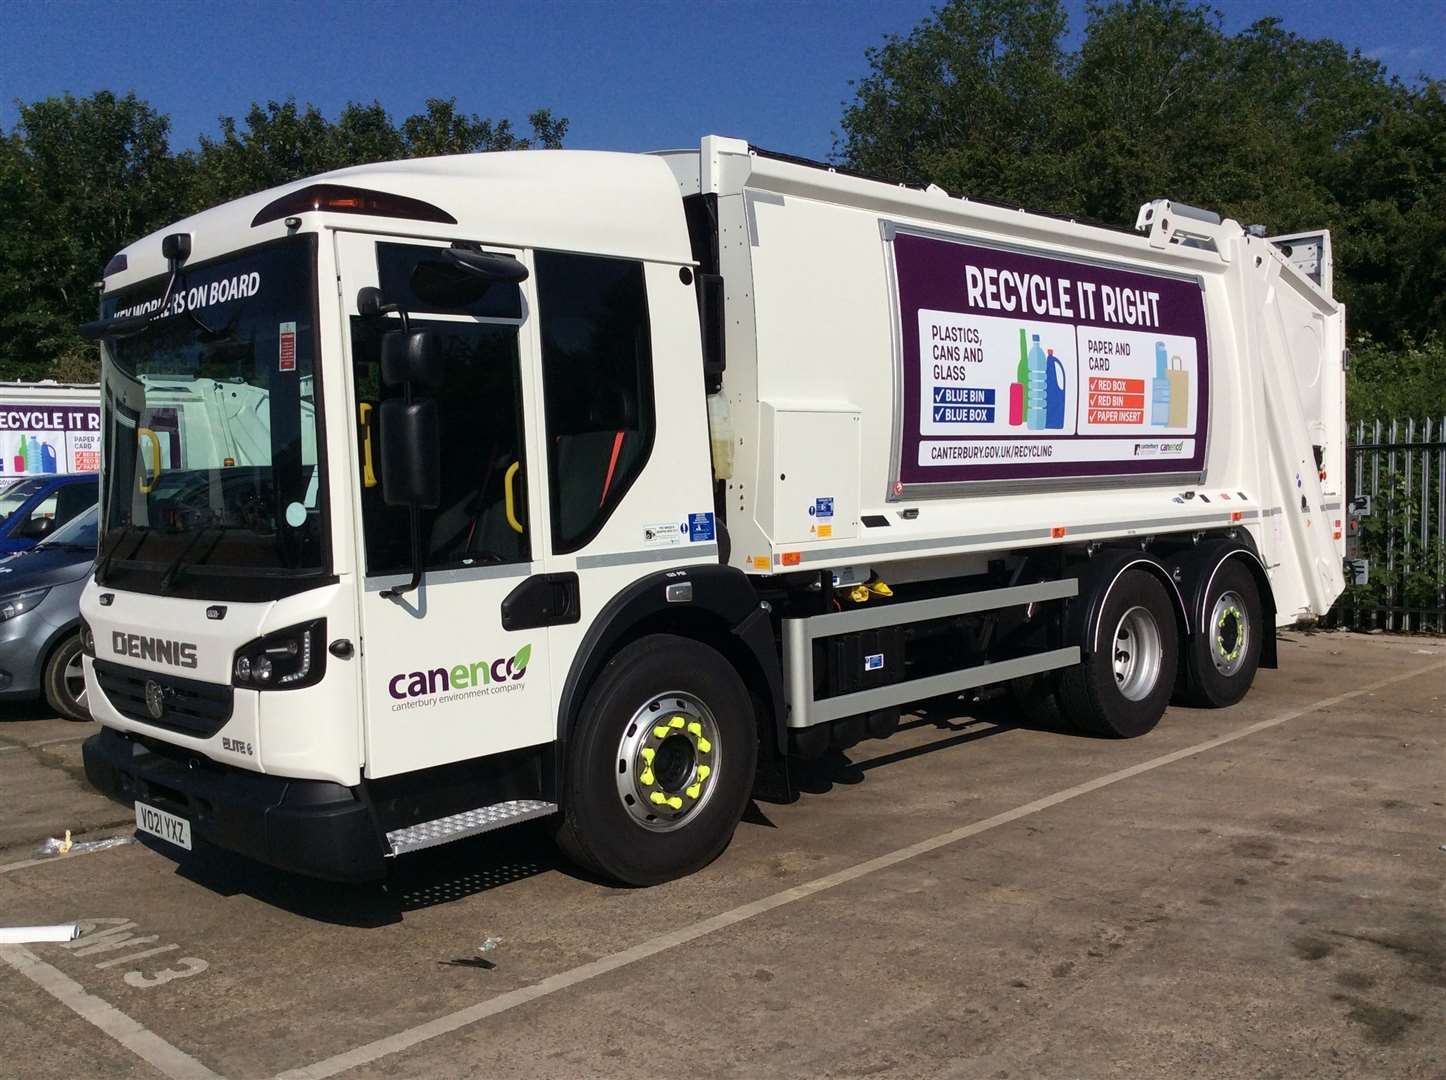 The high-tech new bin lorries are going into service